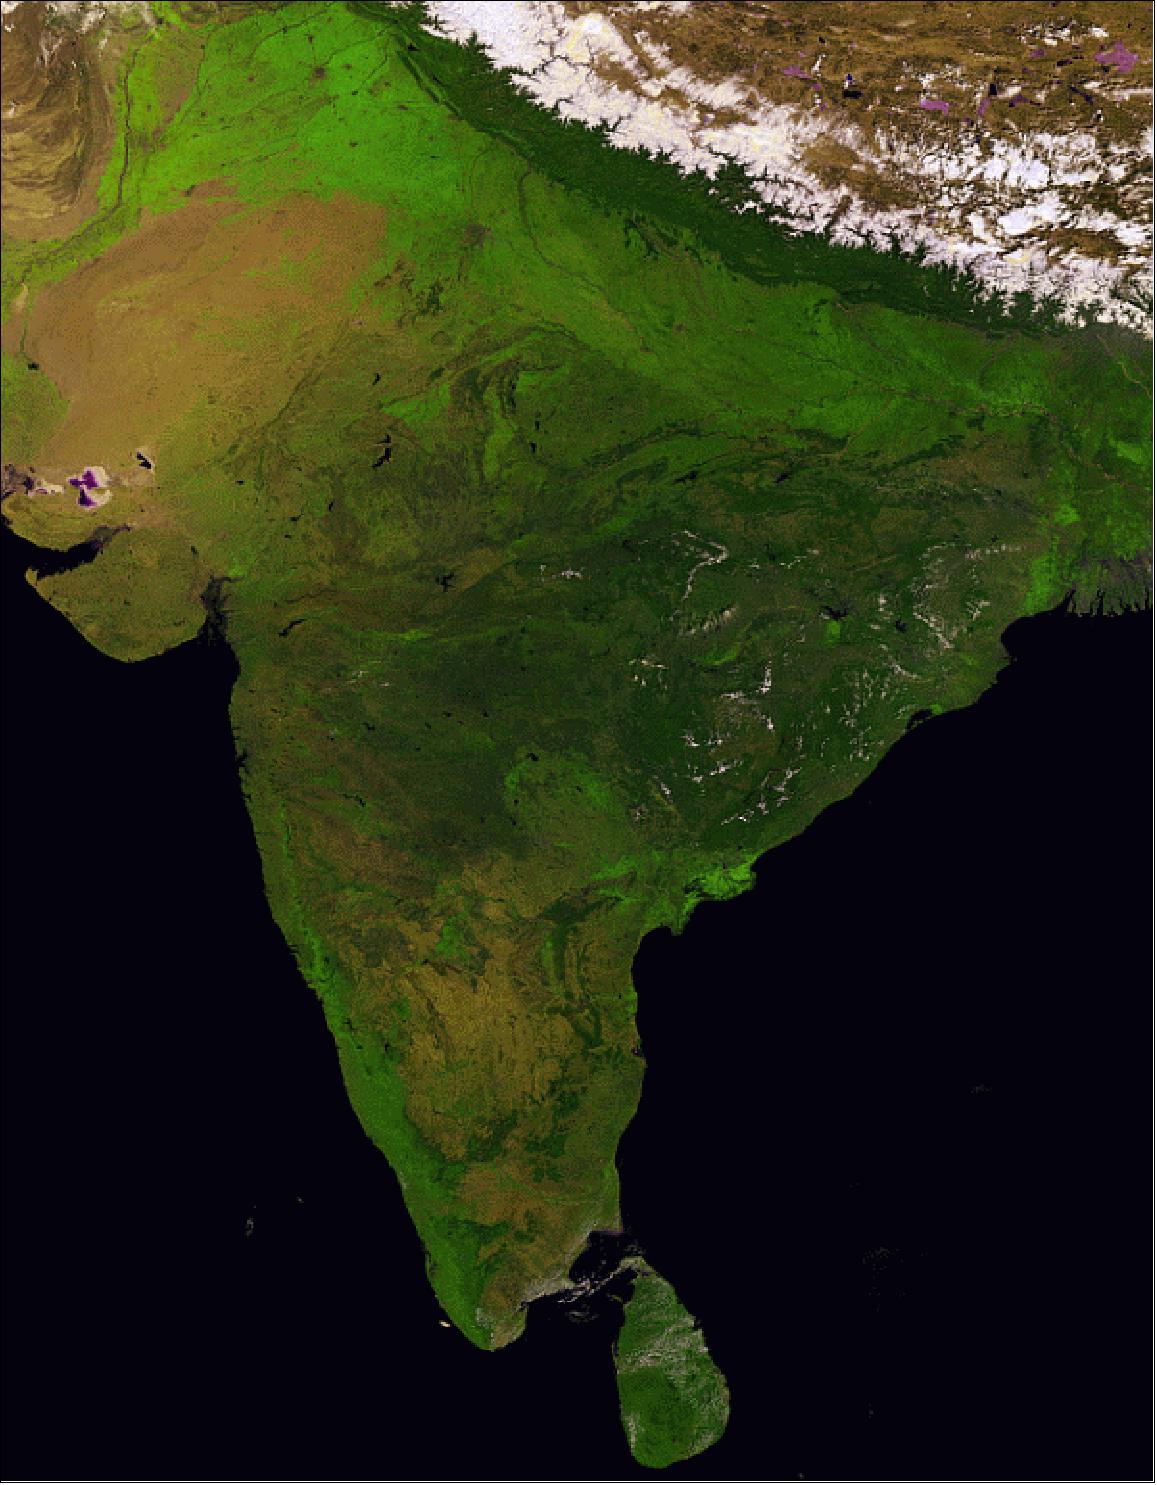 Figure 62: India - from Sri Lanka to the Himalayas, PROBA-V acquired this image on March 14, 2014, (image credit: ESA, VITO)